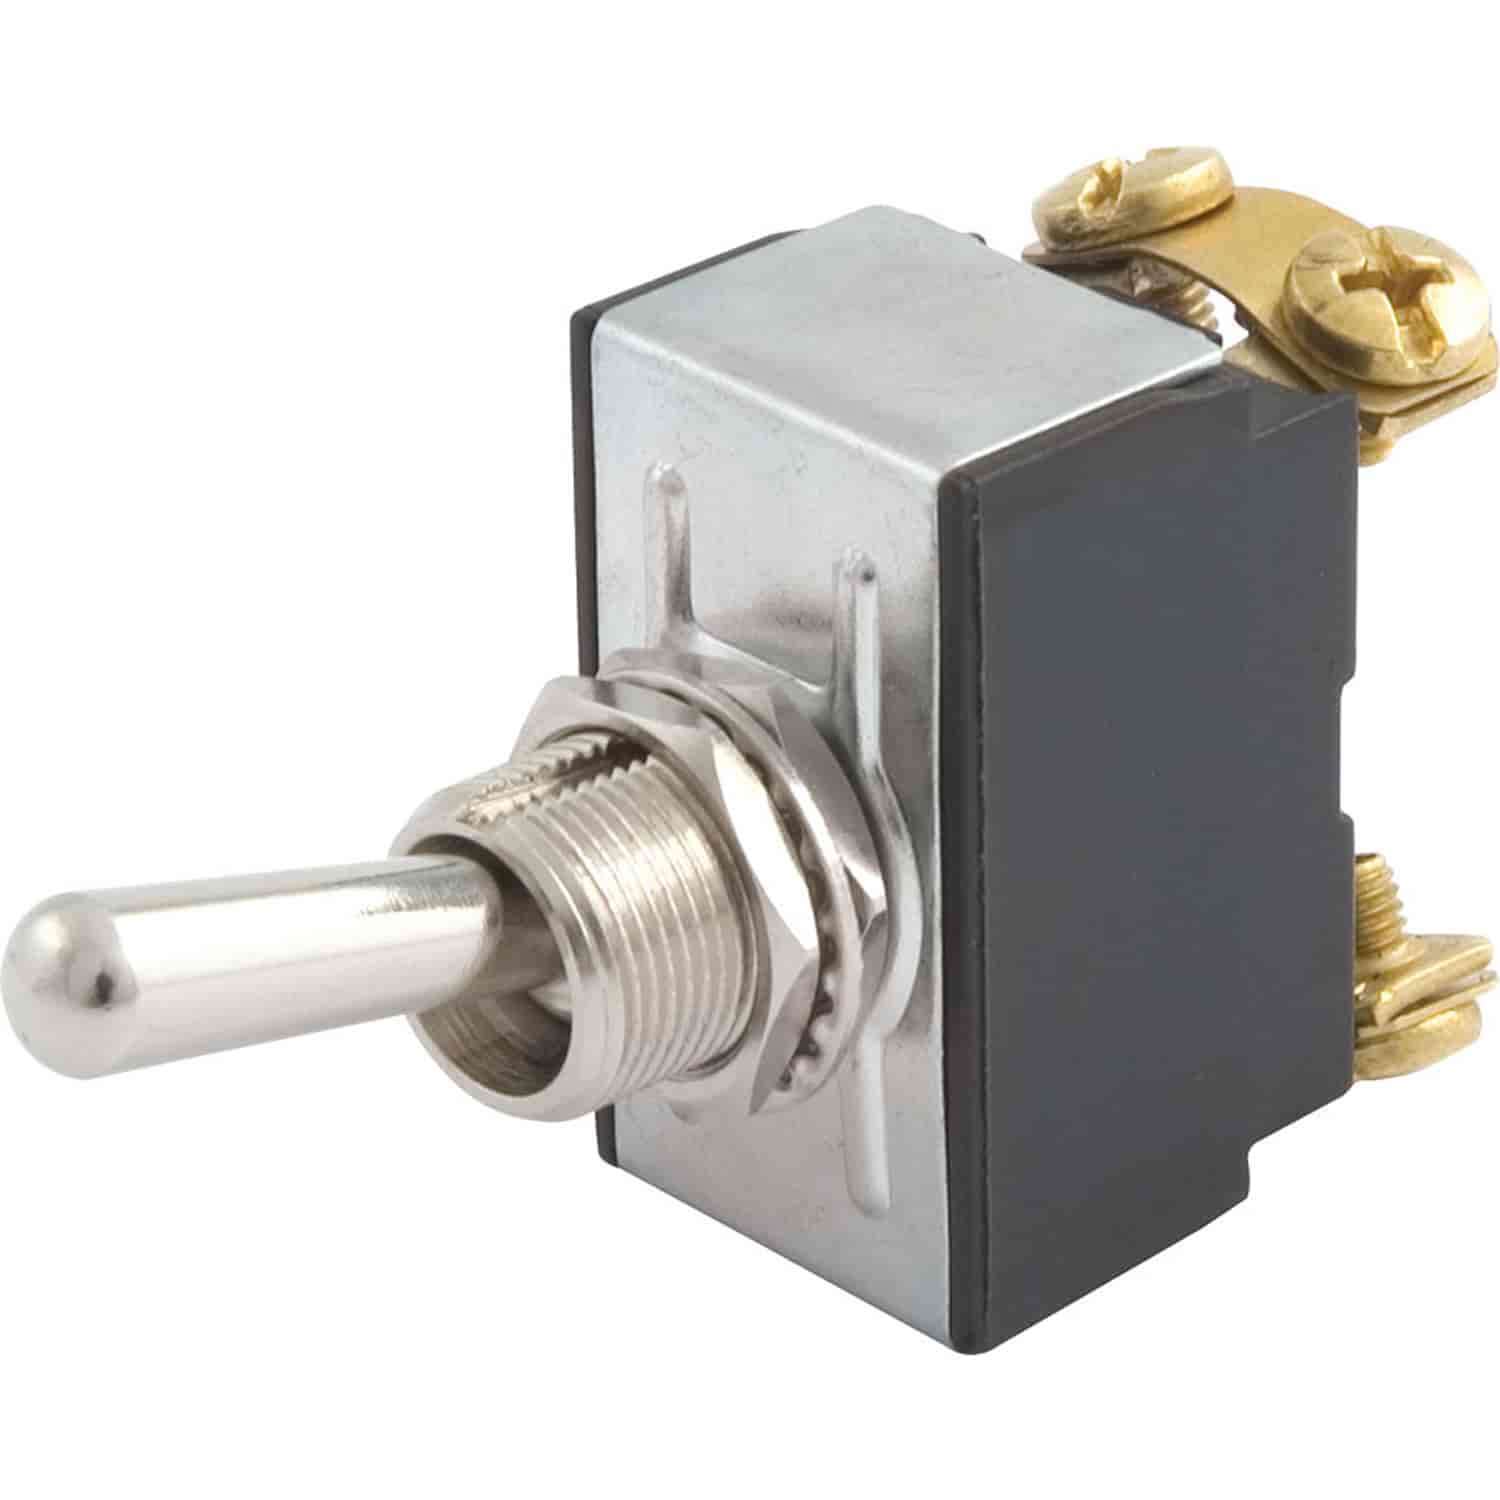 Replacement Toggle Switch Ignition and Accessory